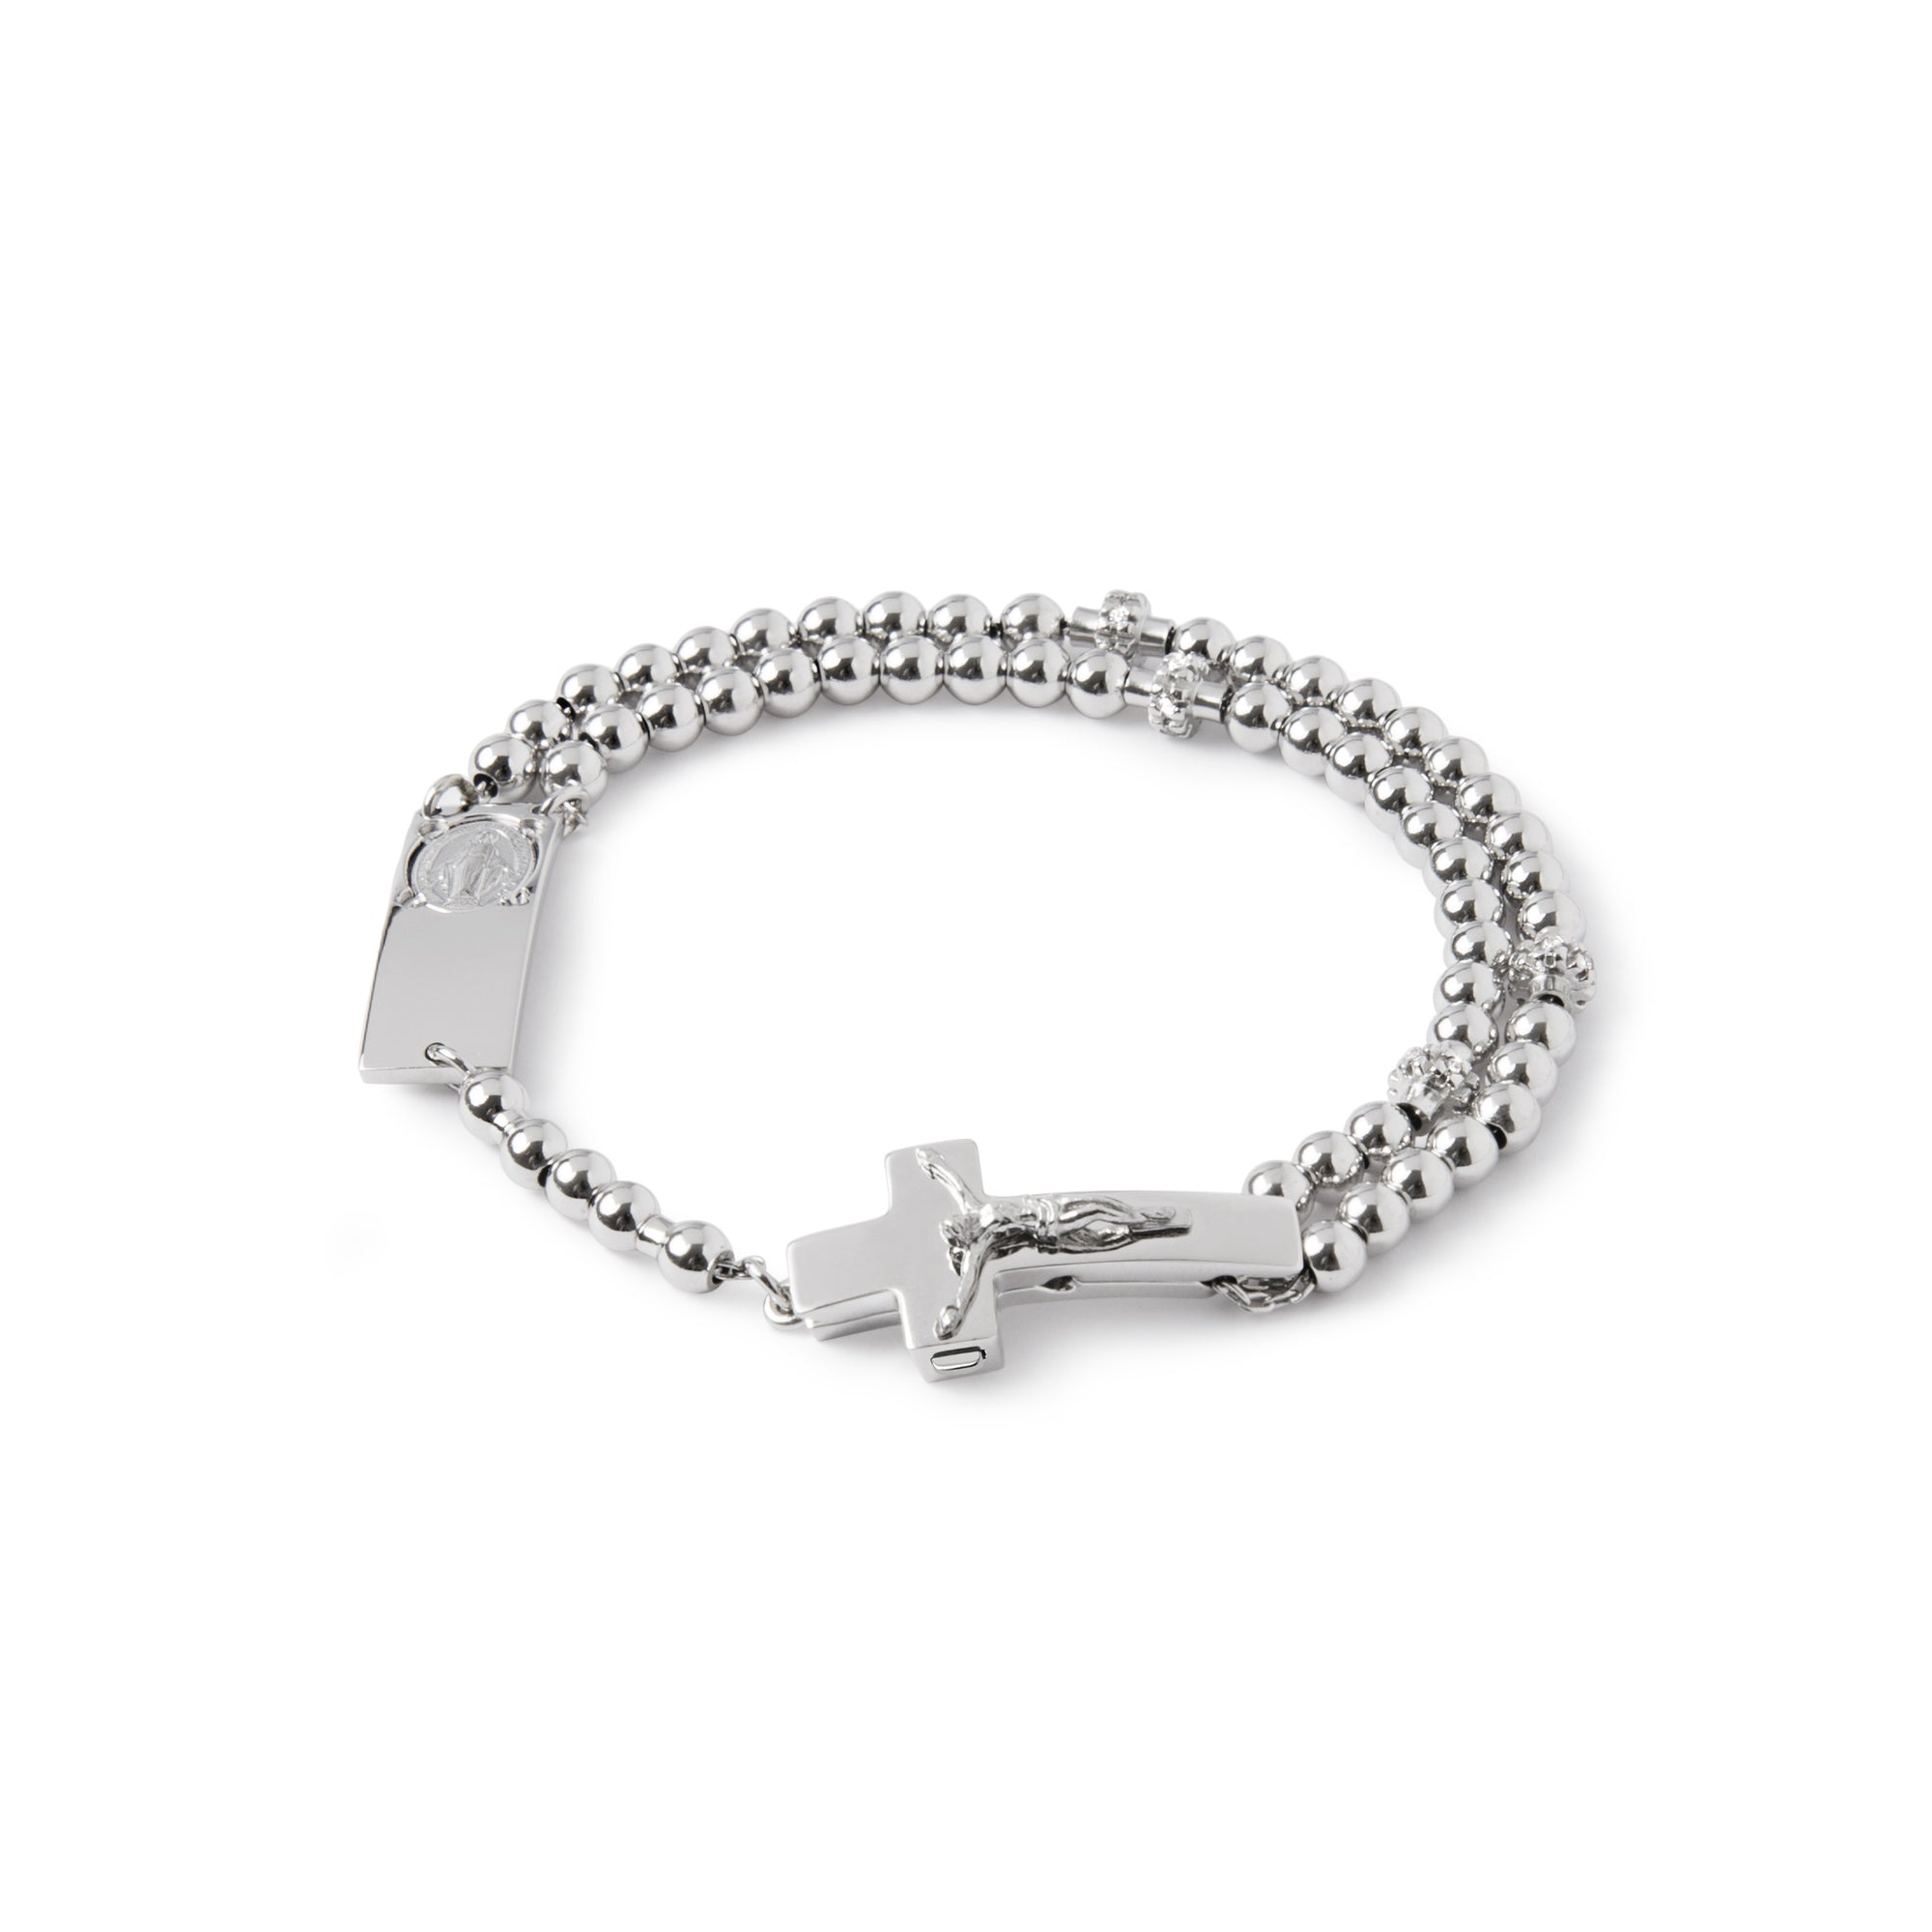 ROSALET® ROUND RHODIUM BEADS,  STERLING SILVER & PAVE PATER, TRADITIONAL